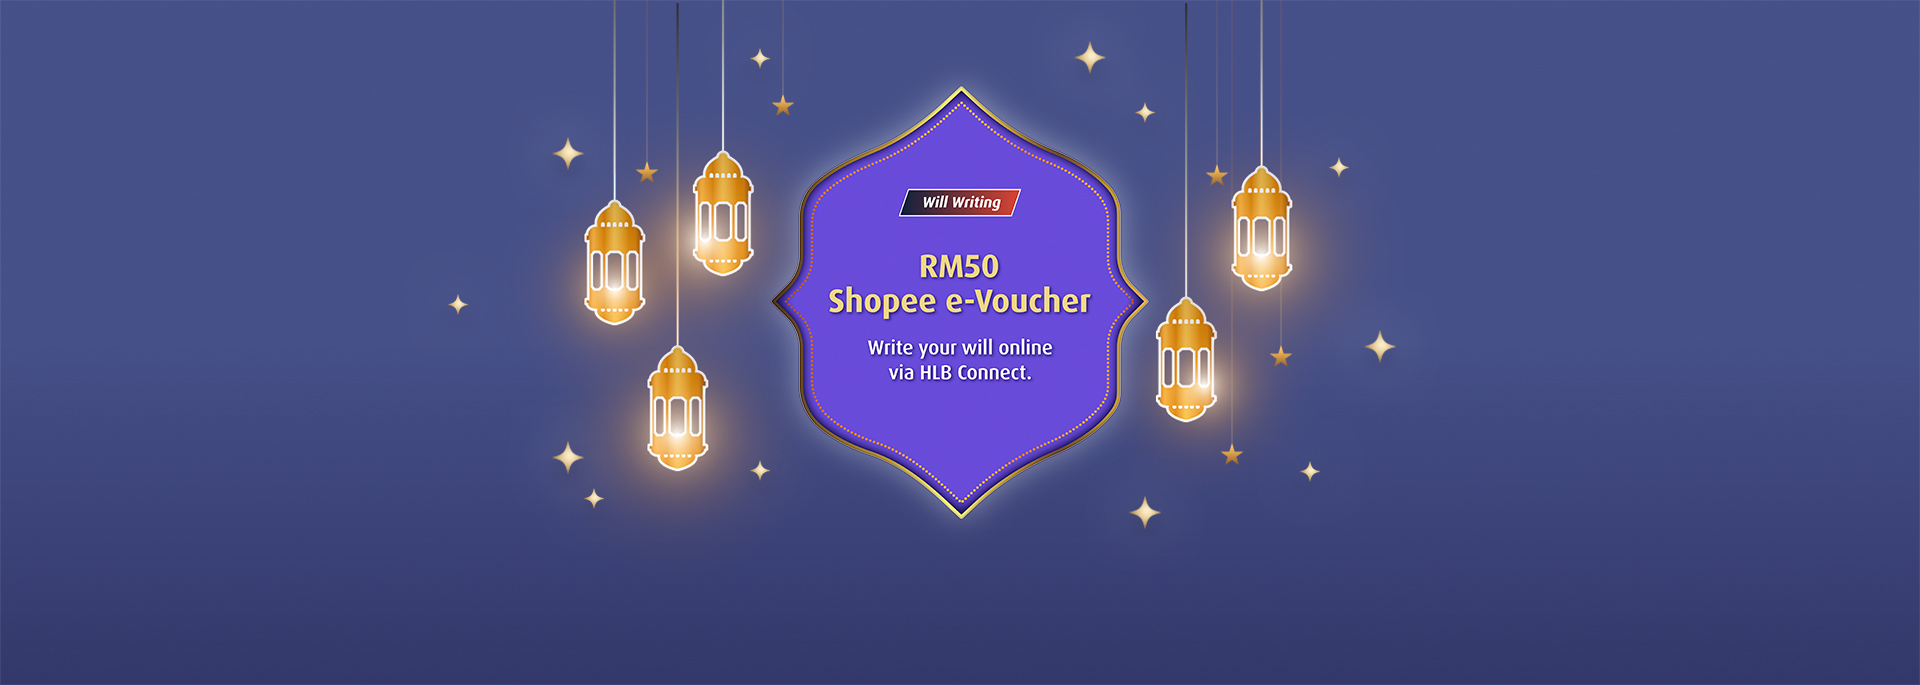 RM50 Shopee e-Voucher  when you apply for will writing services for the first time via HLB Connect